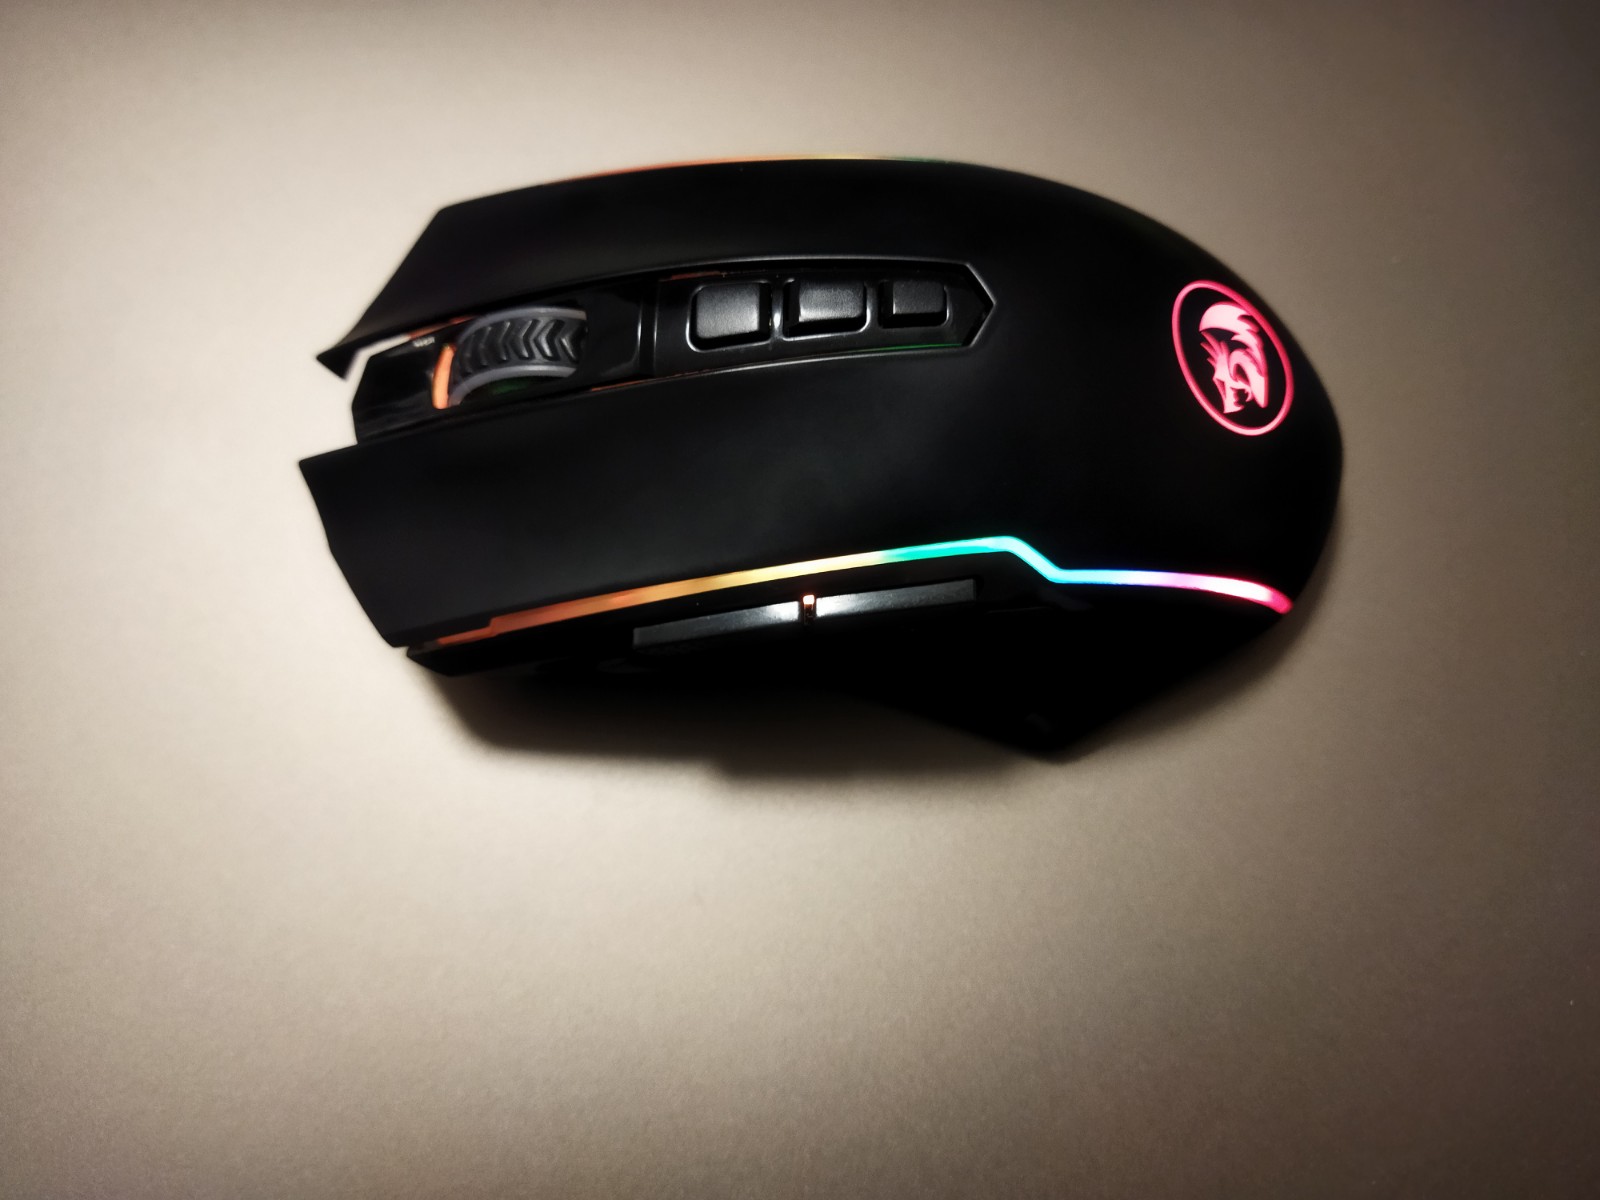 How To Start Using A Redragon Gaming Mouse